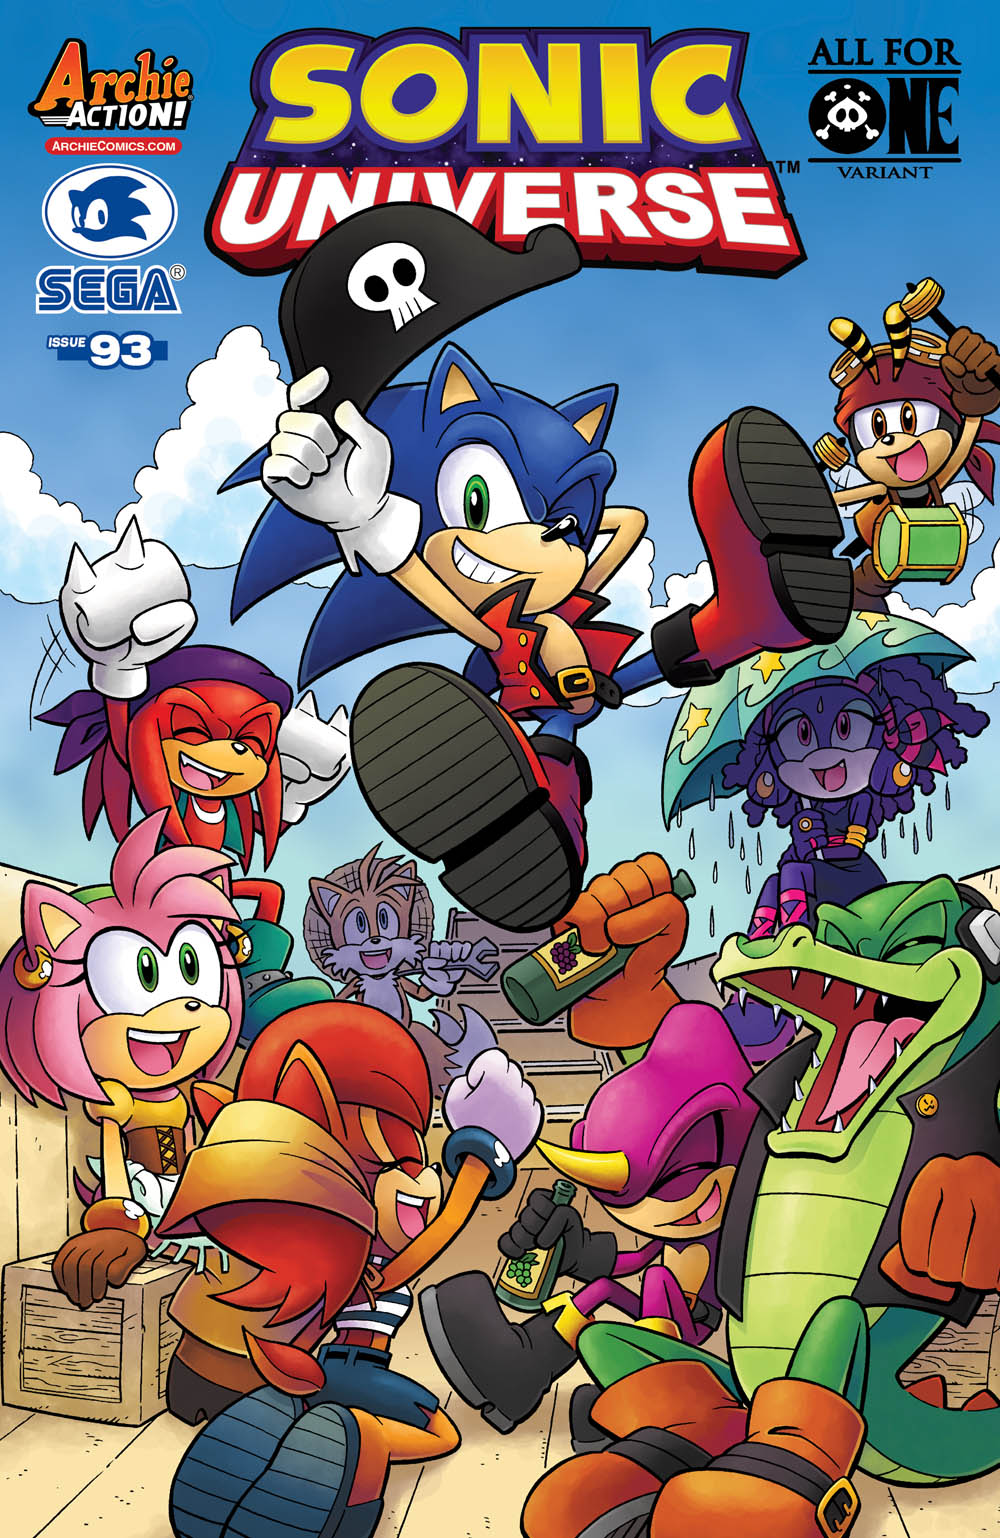 Semi Frequent Sonic Facts Sonic Universe 93 S Variant Cover Homages The Cover Of One Piece Volume 61 T Co Fnt7tdqutv Twitter